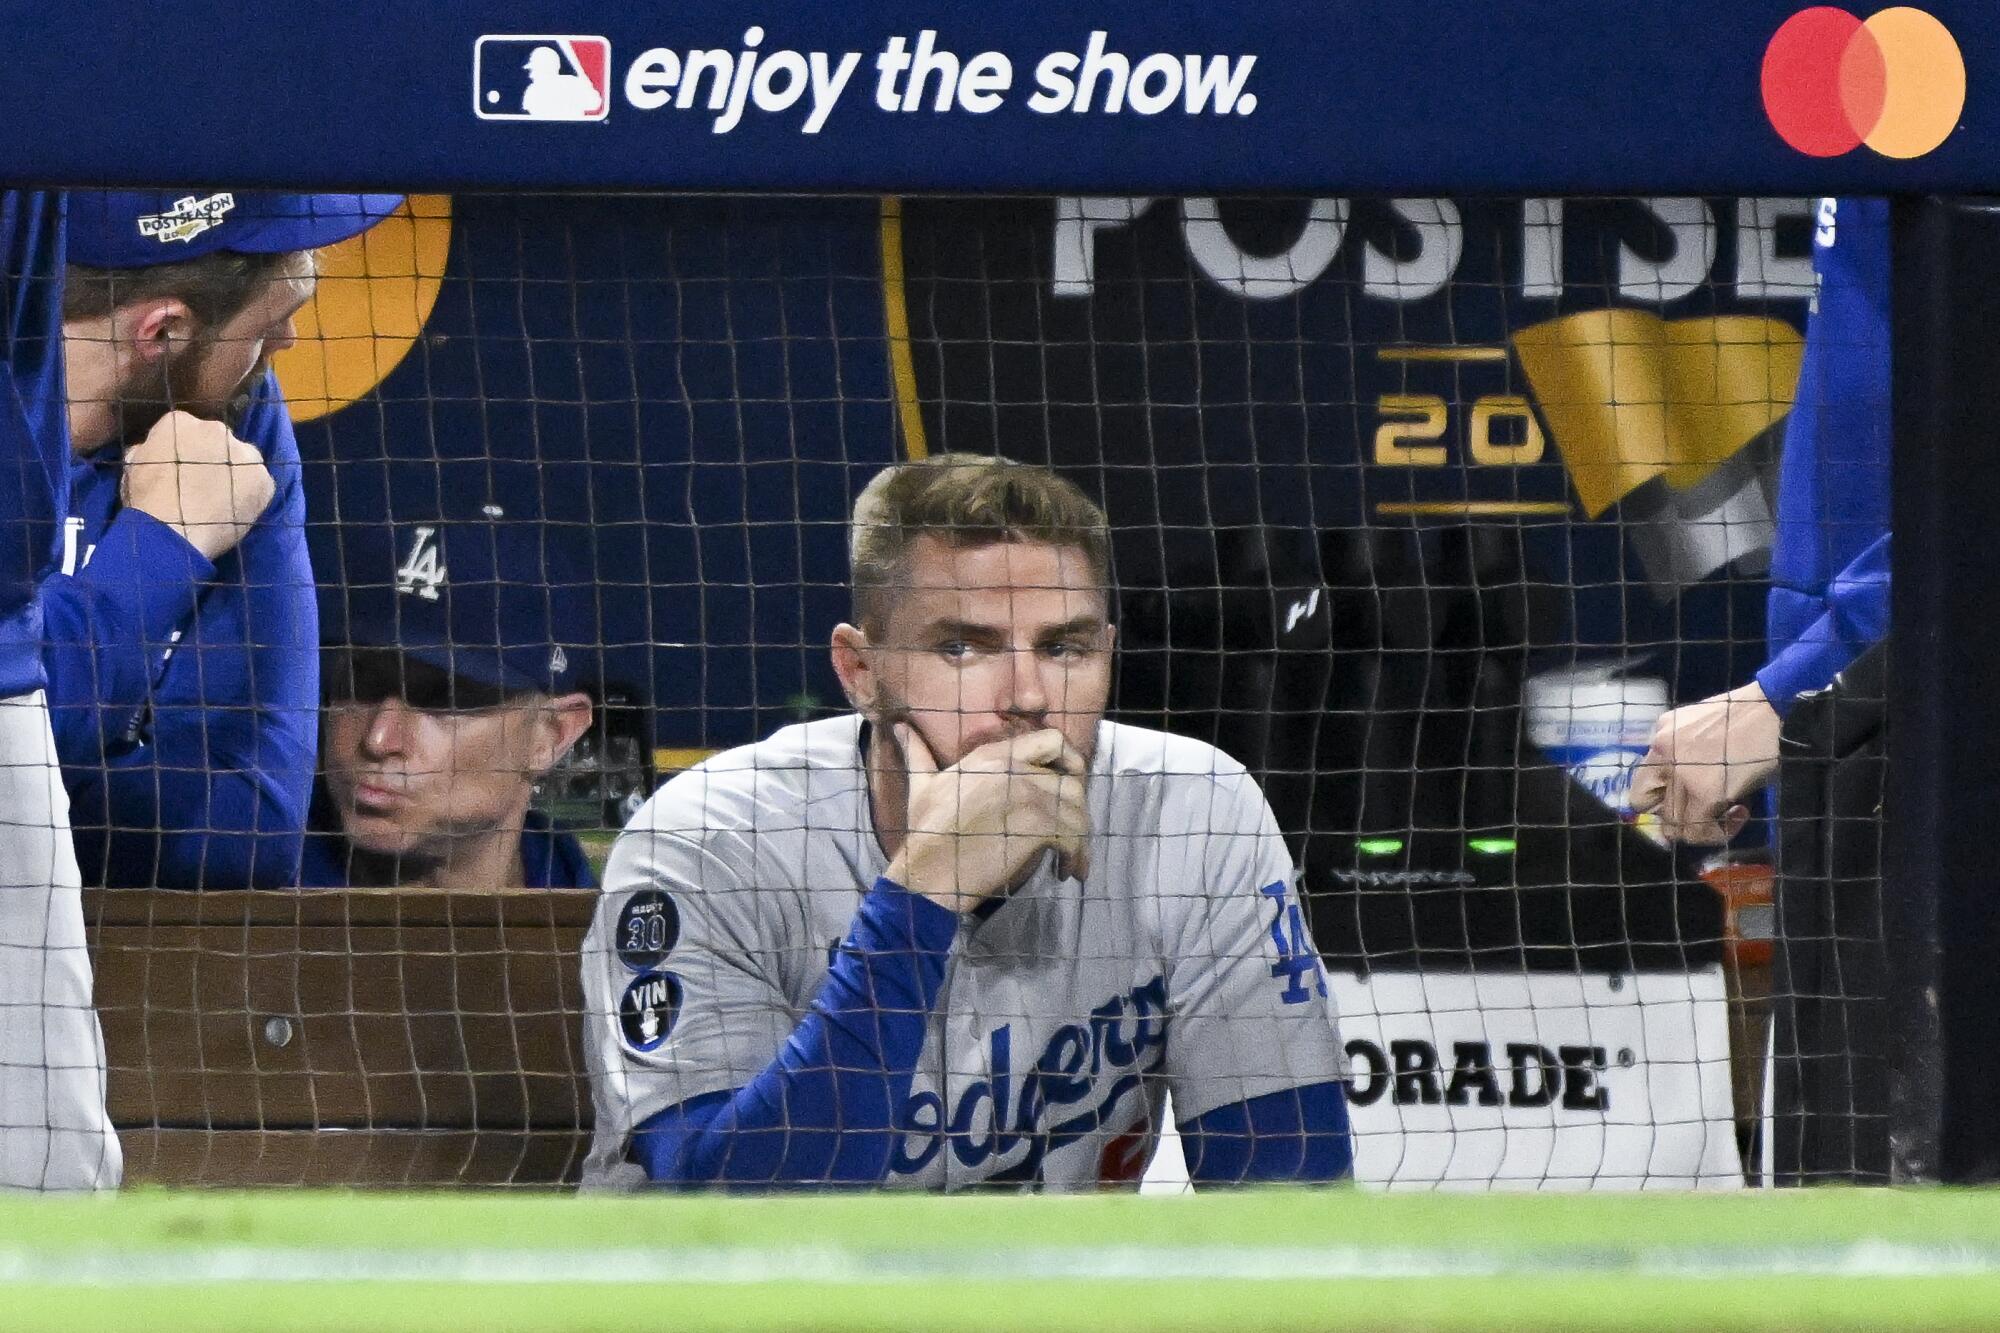 Dodgers first baseman Freddie Freeman watches from the dugout during the eighth inning in Game 3 of the NLDS.